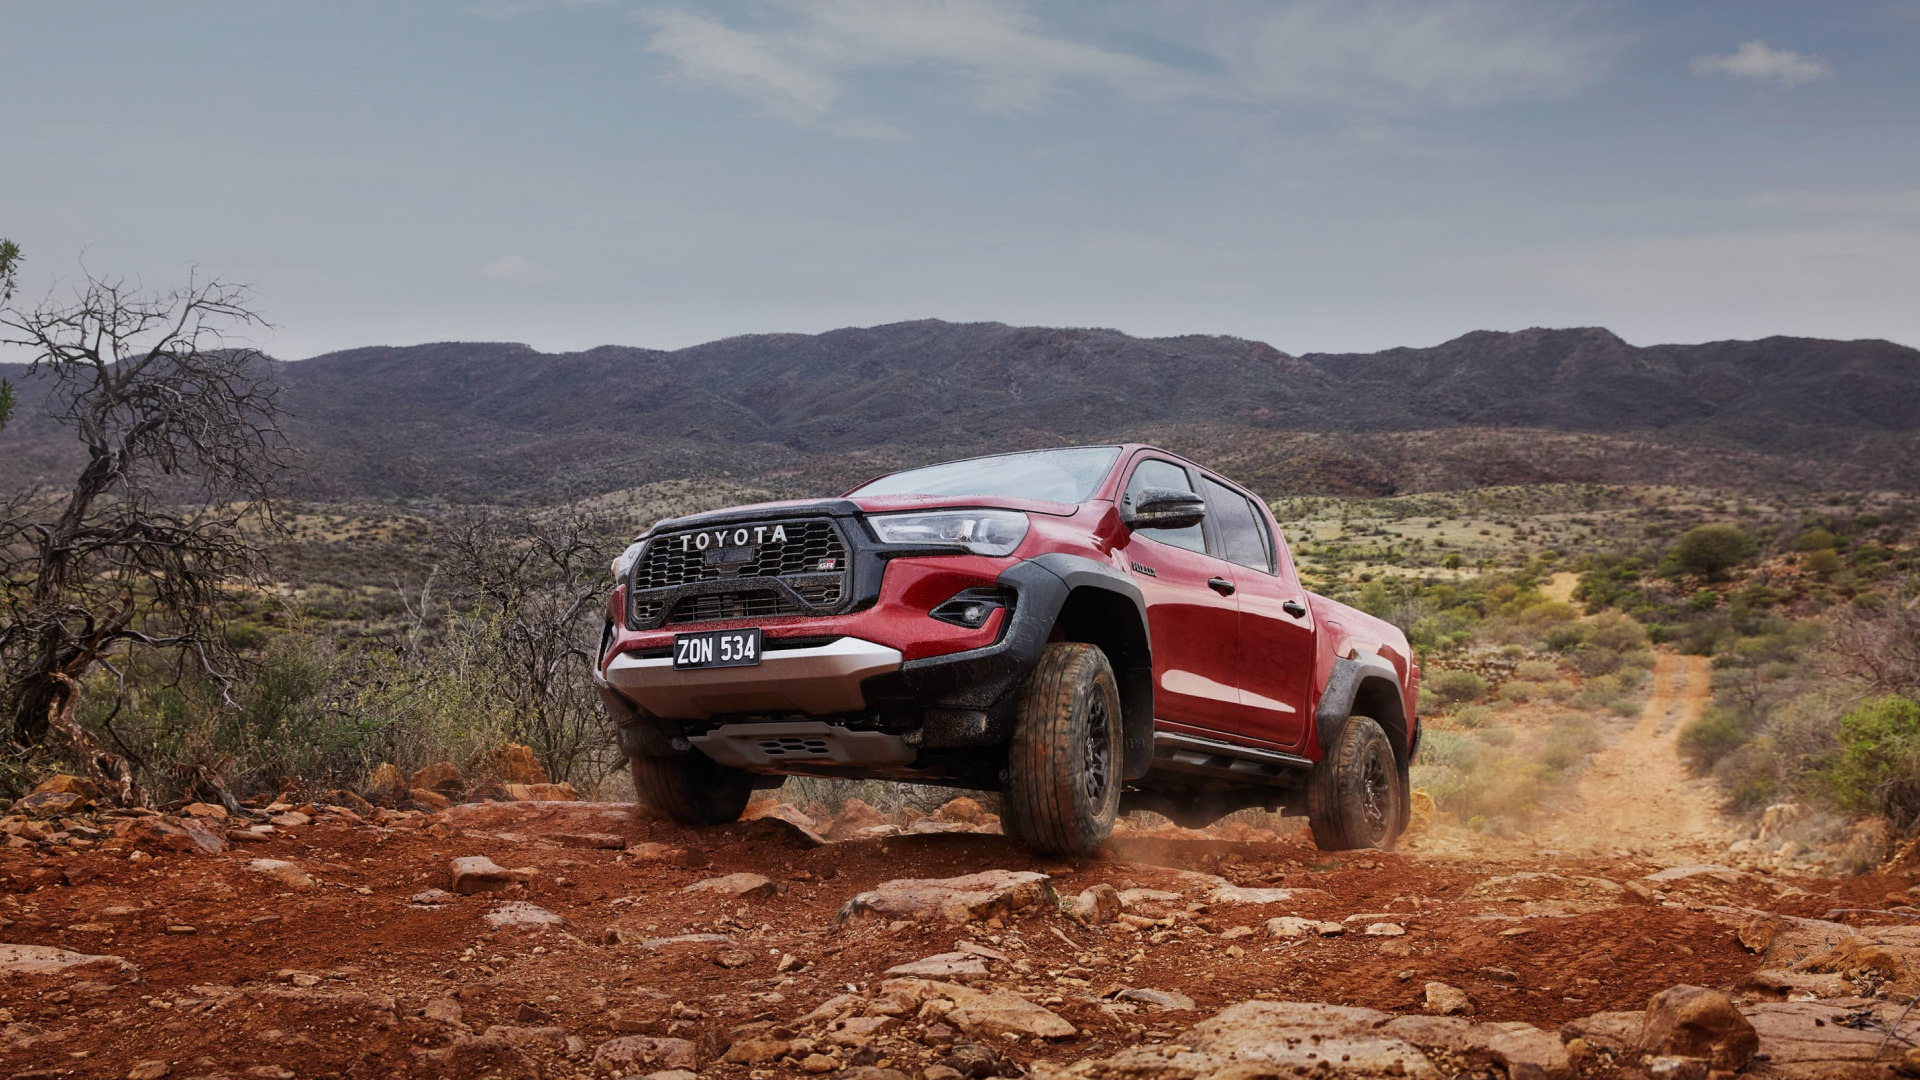 A red HiLux GR Sport climbs a steep off-road track in the mountains, kicking up red dust.